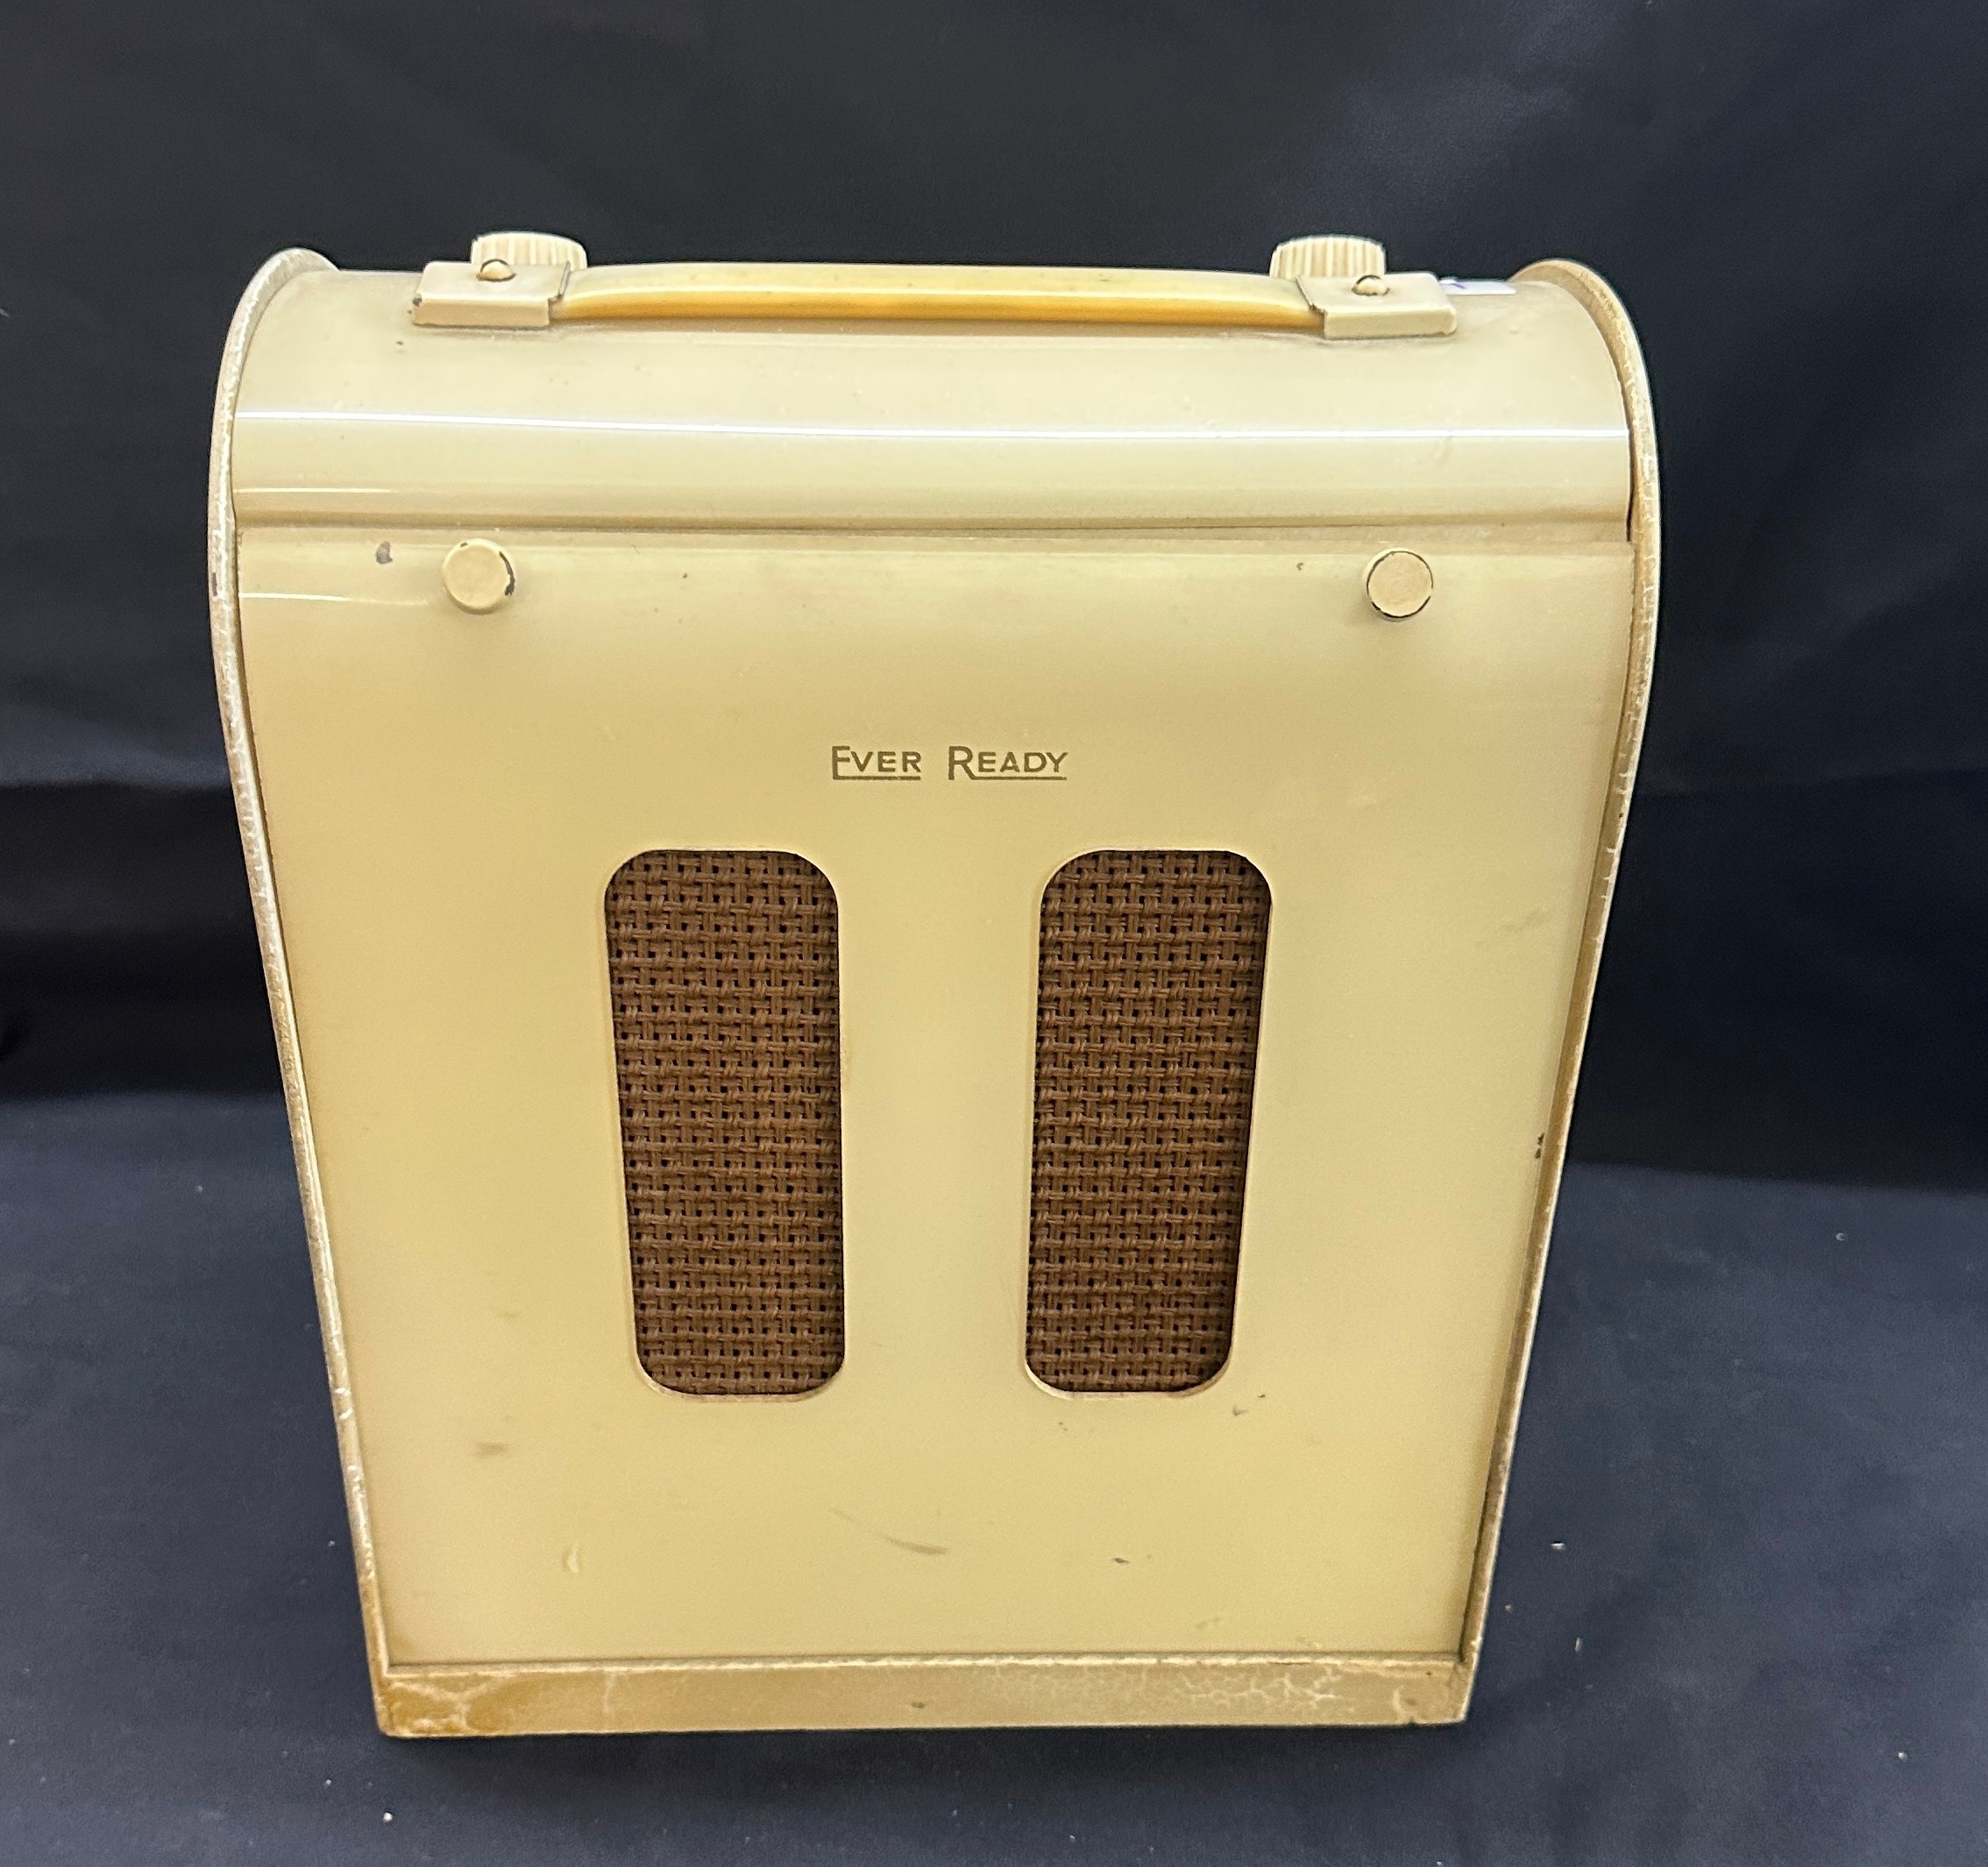 Ever ready 1940's portable radio untested - Image 4 of 4